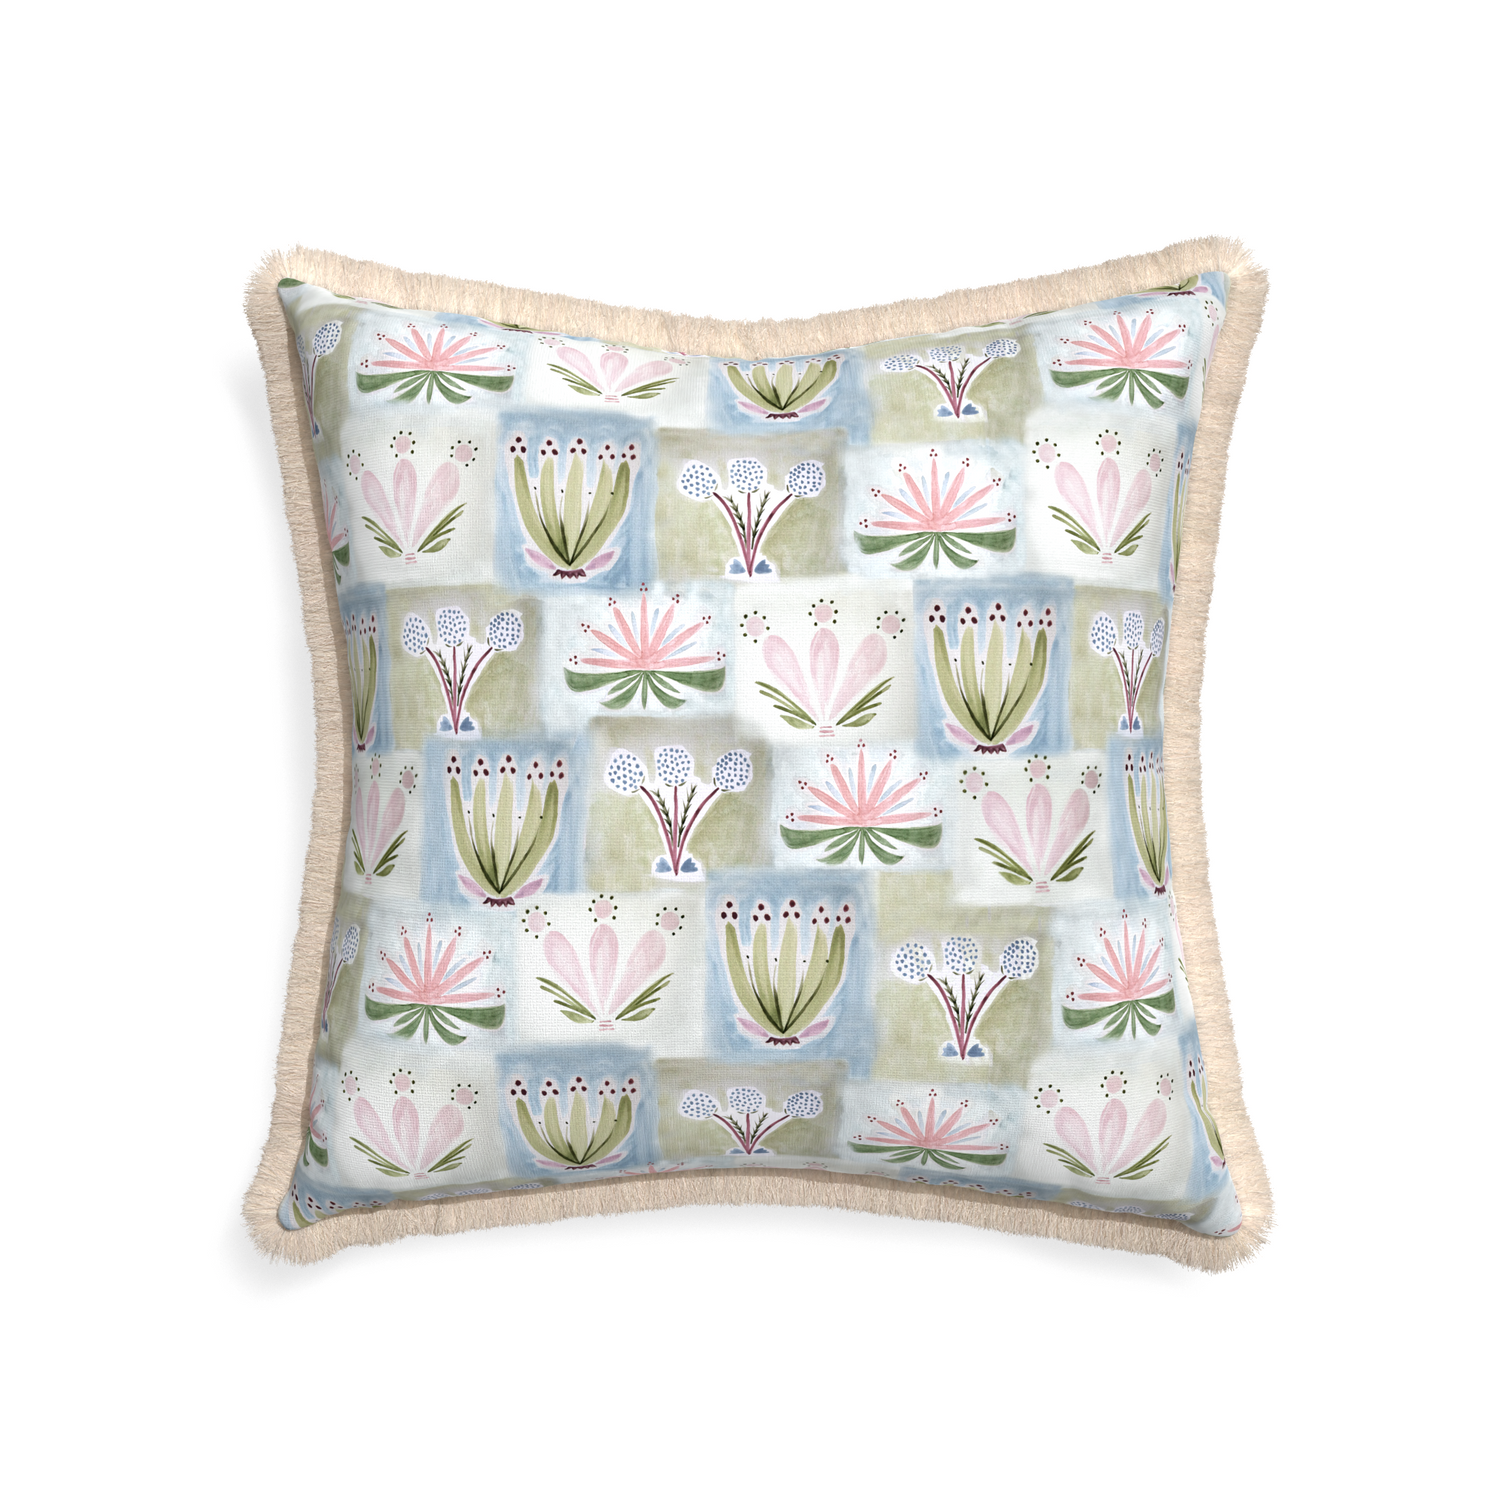 22-square harper custom hand-painted floralpillow with cream fringe on white background